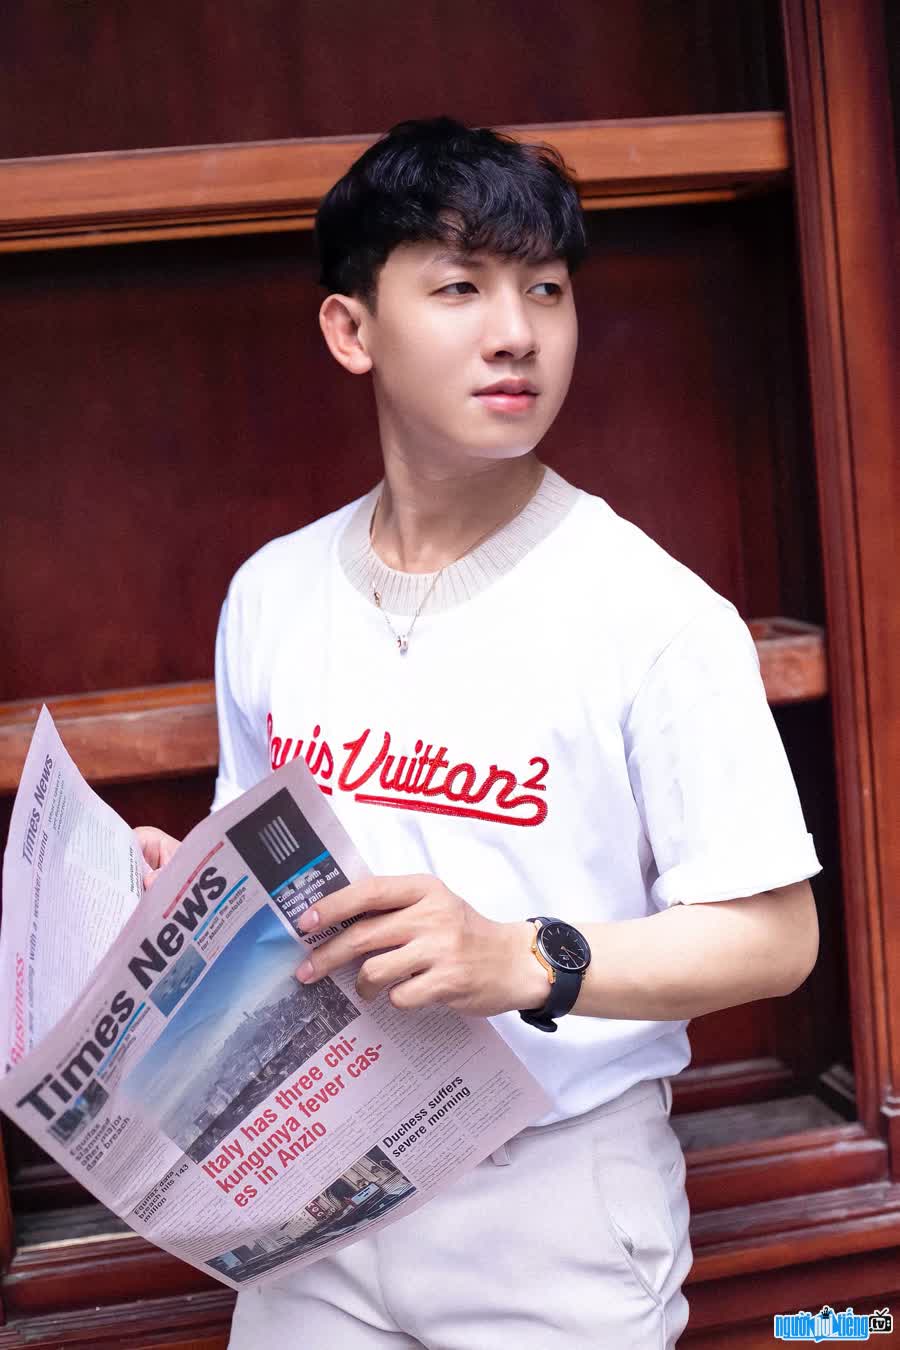 Tay Ninh guy attracts attention with his handsome appearance and sweet voice